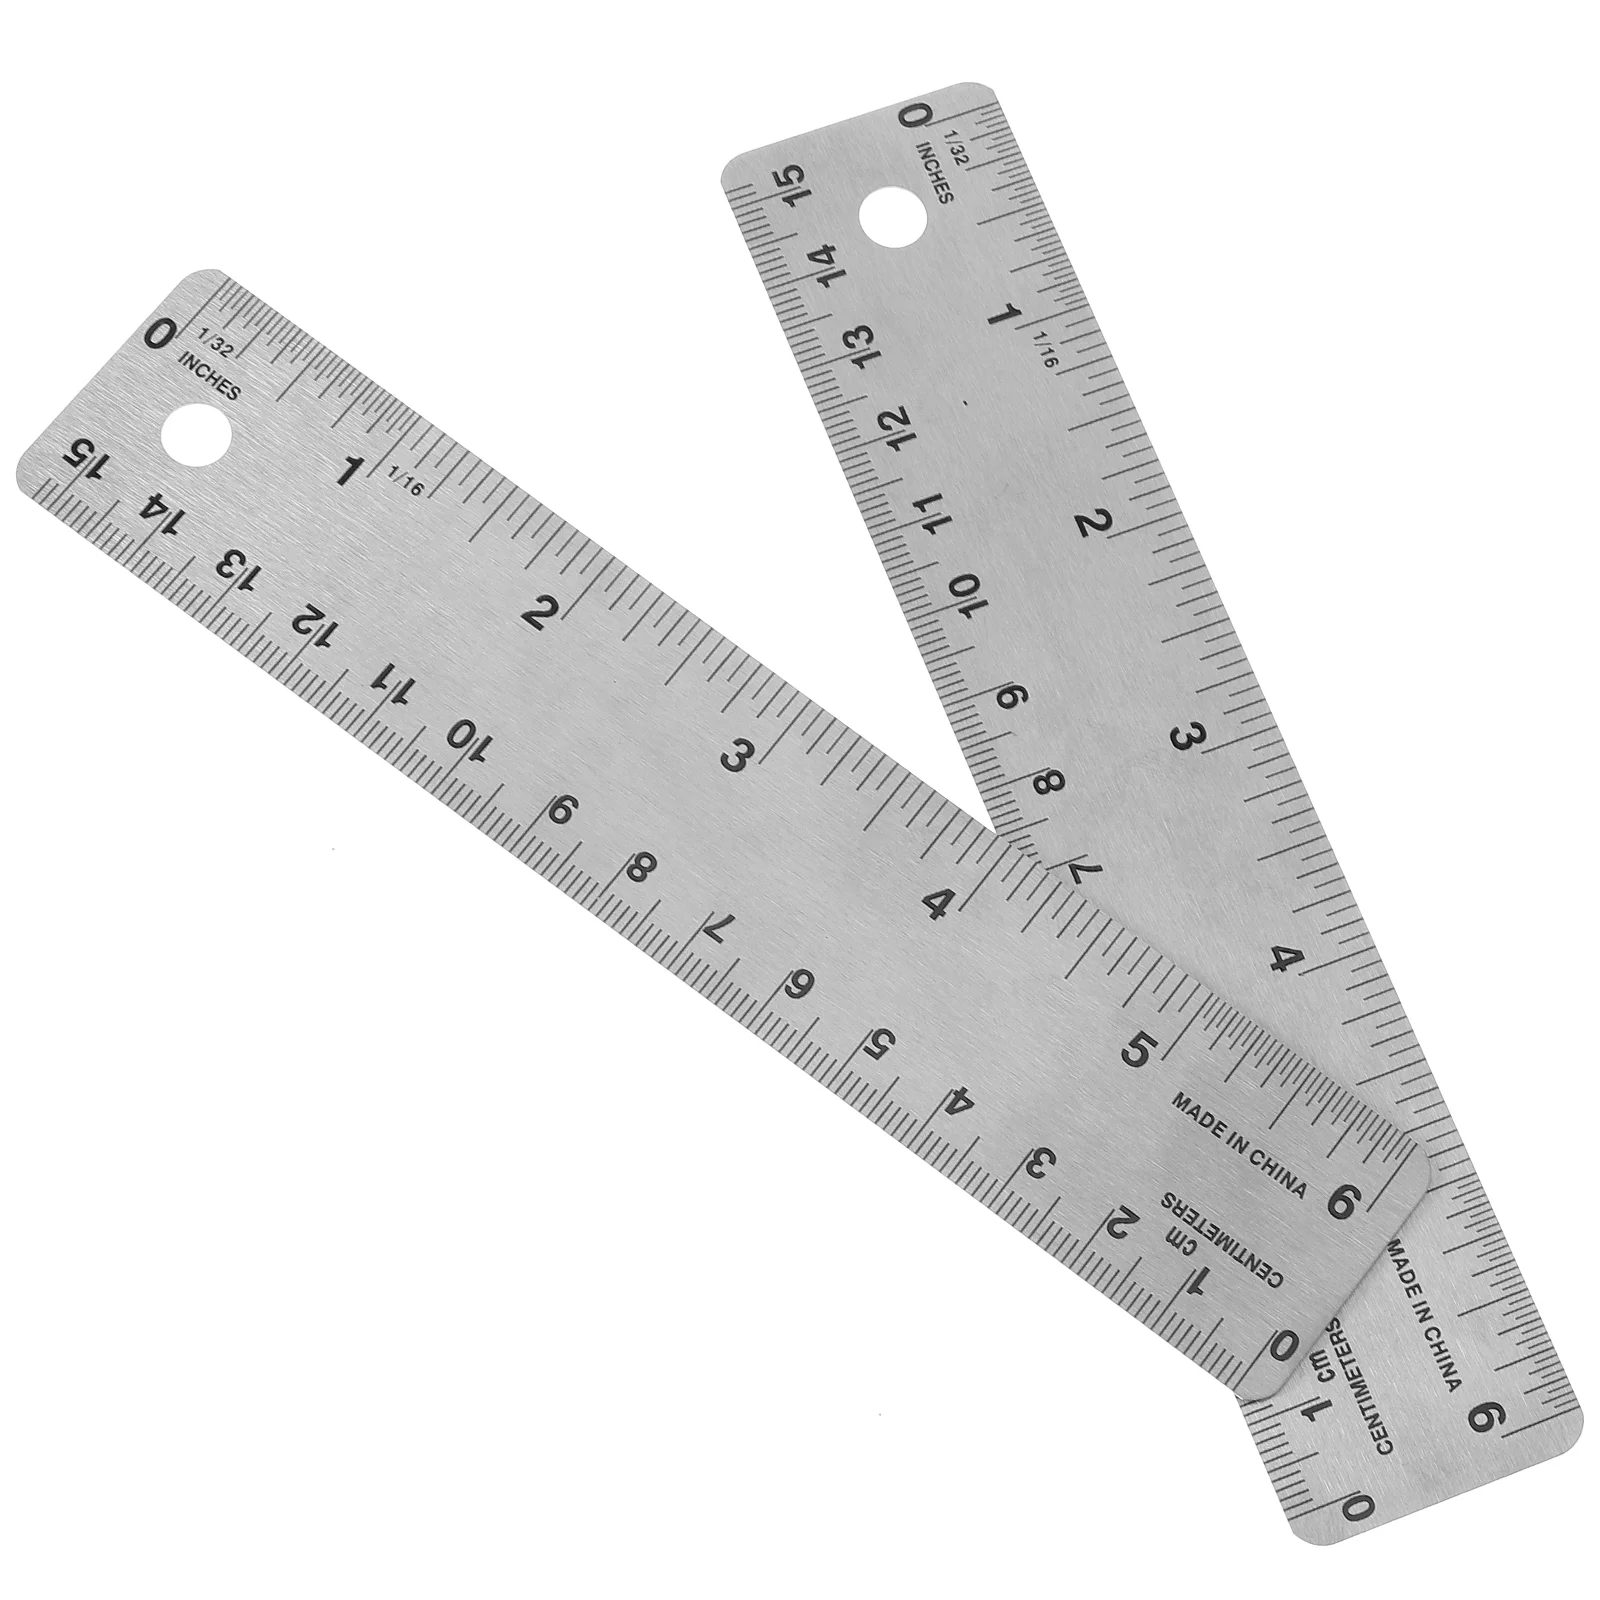 2 Pcs Cork Stainless Steel Ruler Straight Woodworking Measuring Corked Rulers for Engineering Drawing Student 10 pcs cat drawing ruler wooden cartoon measuring rulers for kids metric system